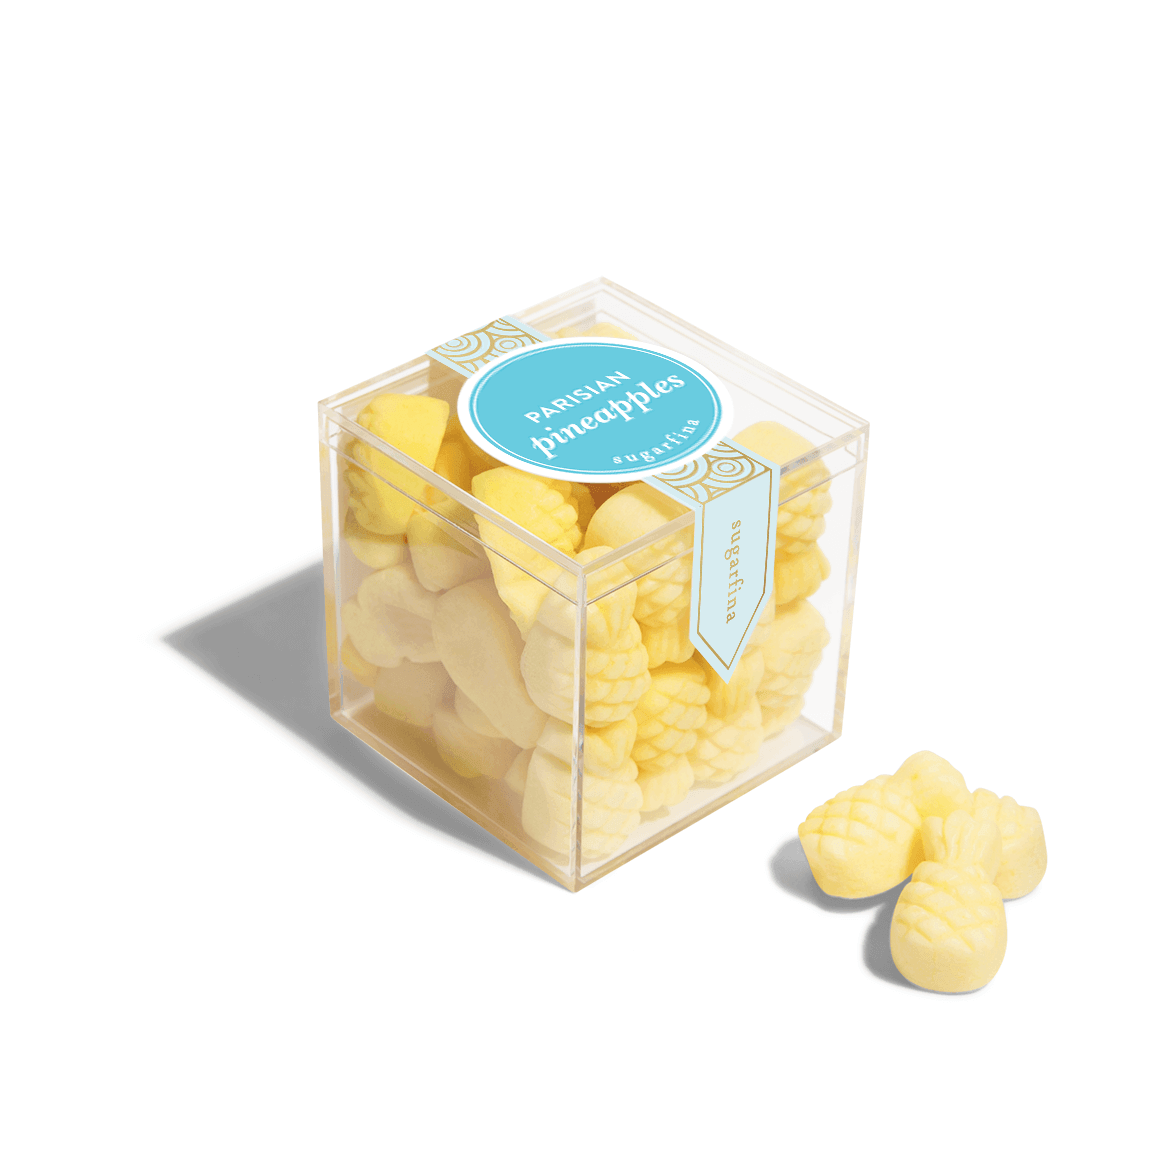 Send your gift box recipient on a tropical staycation with these gummy Pineapple Candies from Sugarfina. From Paris with love, these darling baby pineapples are made with fresh fruit for an all-natural tropical treat. Gift box. Gift Delivery Red Deer.